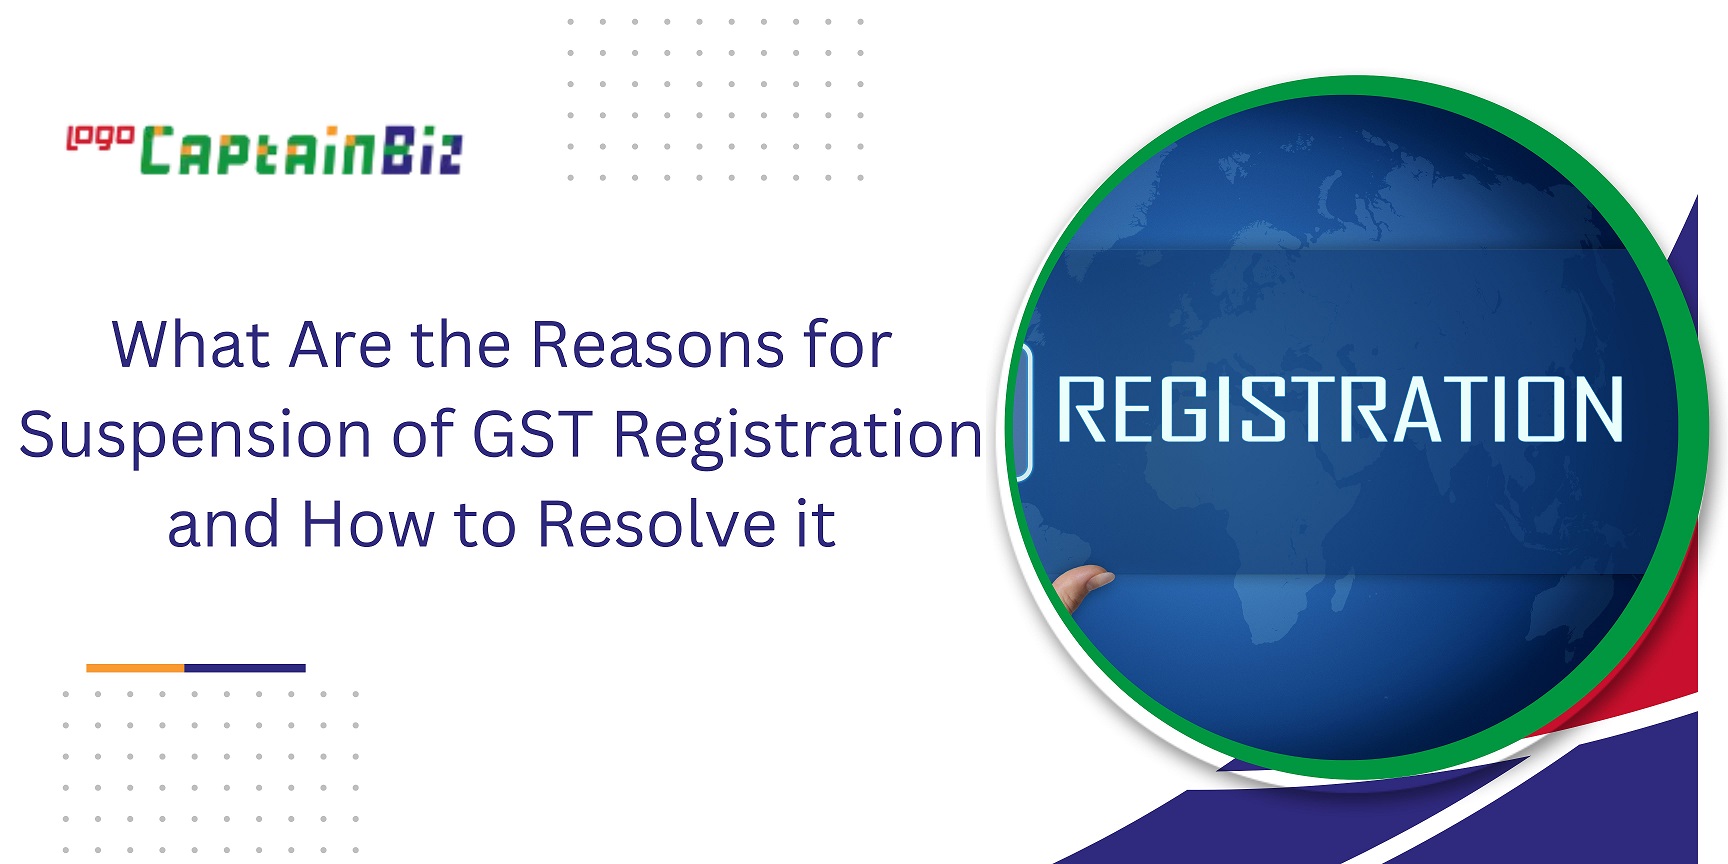 CaptainBiz: What Are the Reasons for Suspension of GST Registration and How to Resolve it